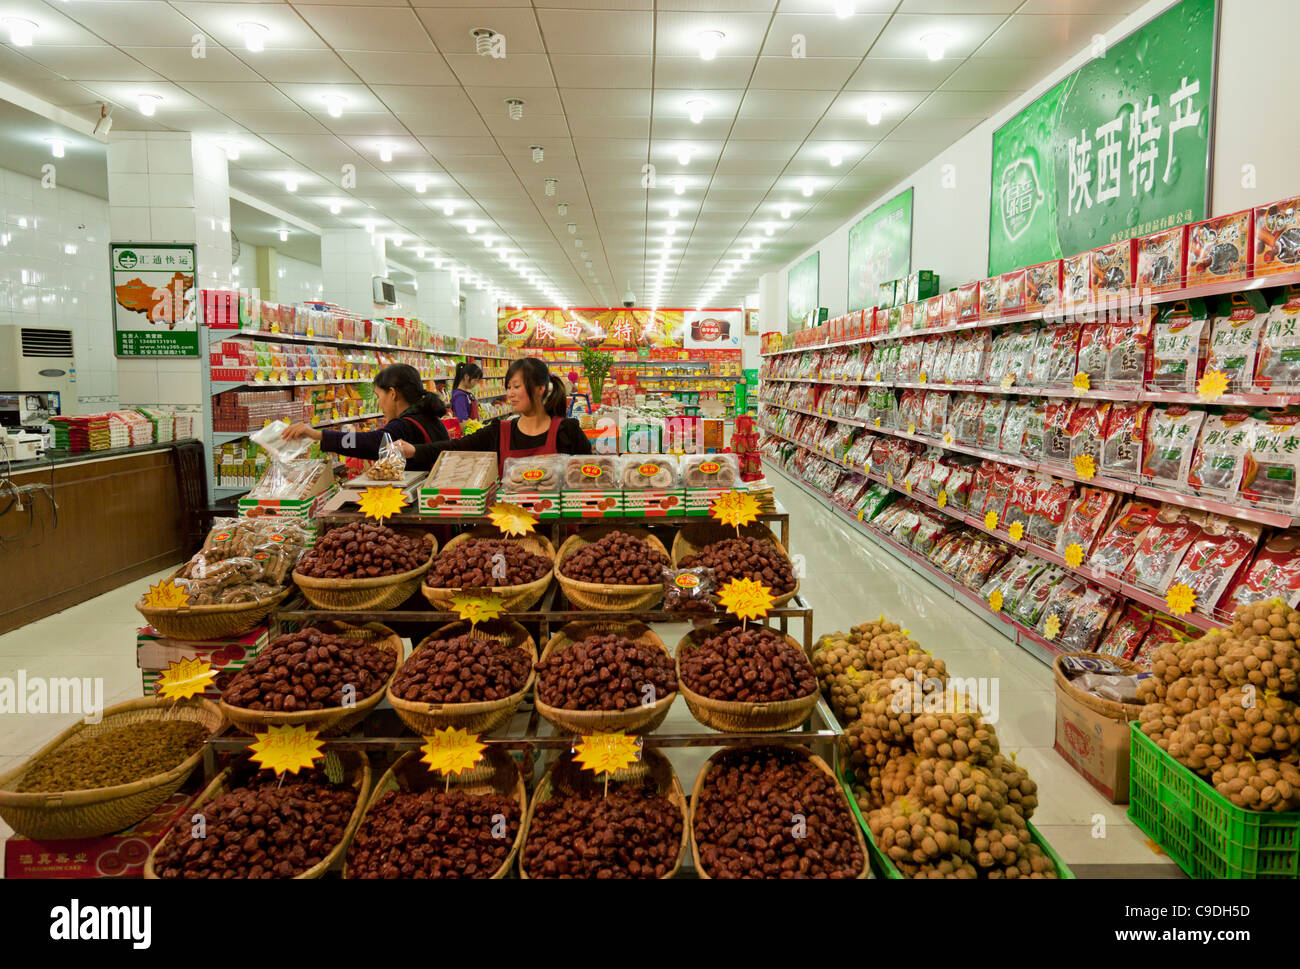 Inside a chinese supermarket food items for sale Xian Shaanxi Province, PRC, People's Republic of China, Asia Stock Photo